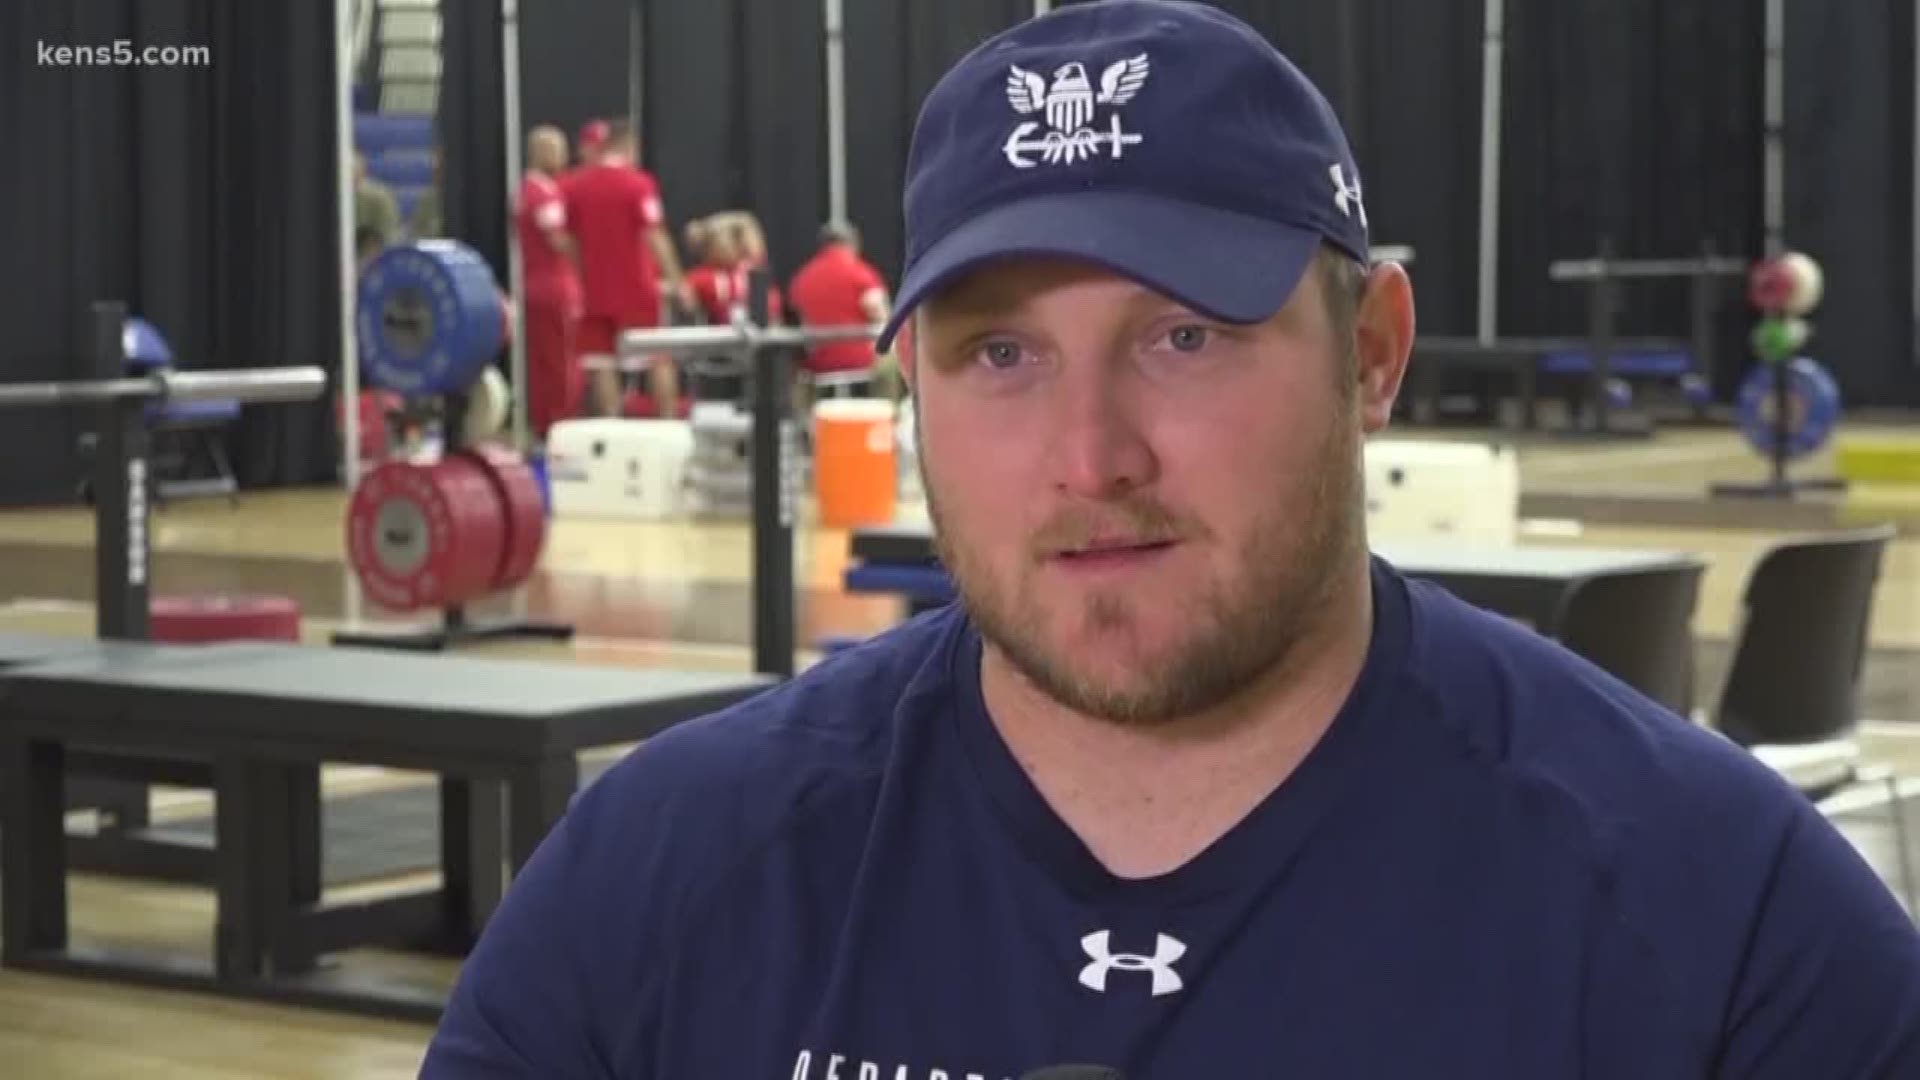 A Navy veteran had a difficult journey before getting to the Warrior Games.